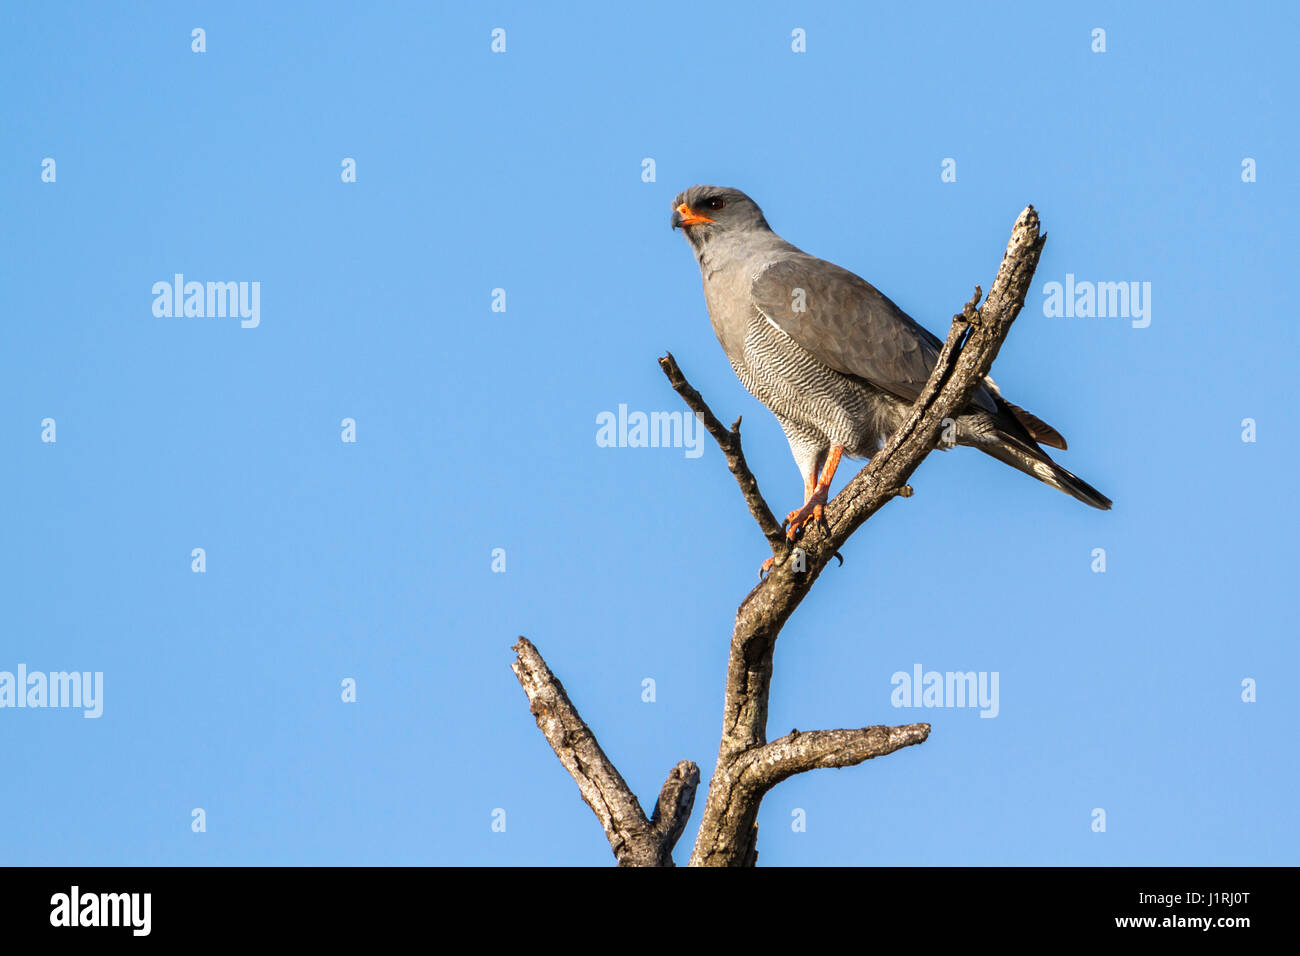 Dark chanting-goshawk in Kruger national park, South Africa ; Specie Melierax metabates family of Accipitridae Stock Photo